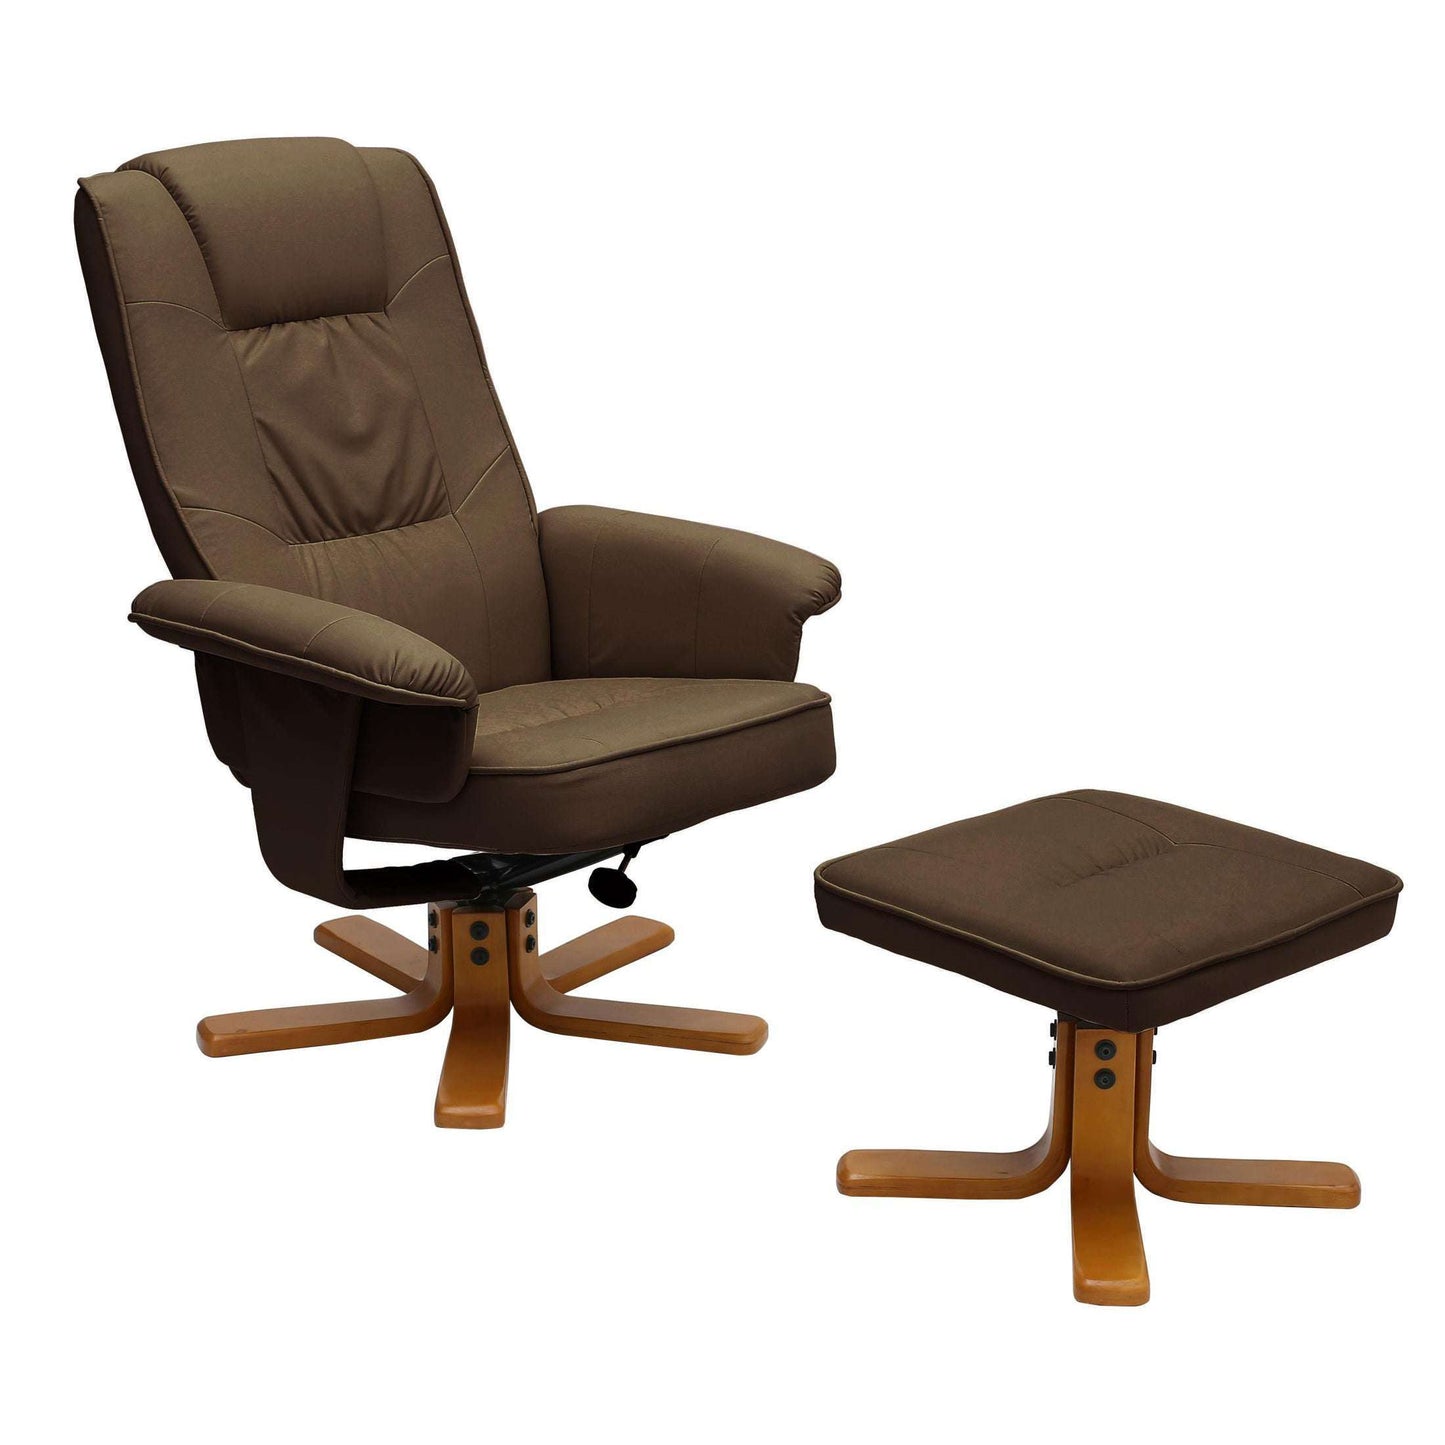 Ashpinoke:Althorpe Recliner with Footstool Polyurethane Brown,Chairs,Heartlands Furniture